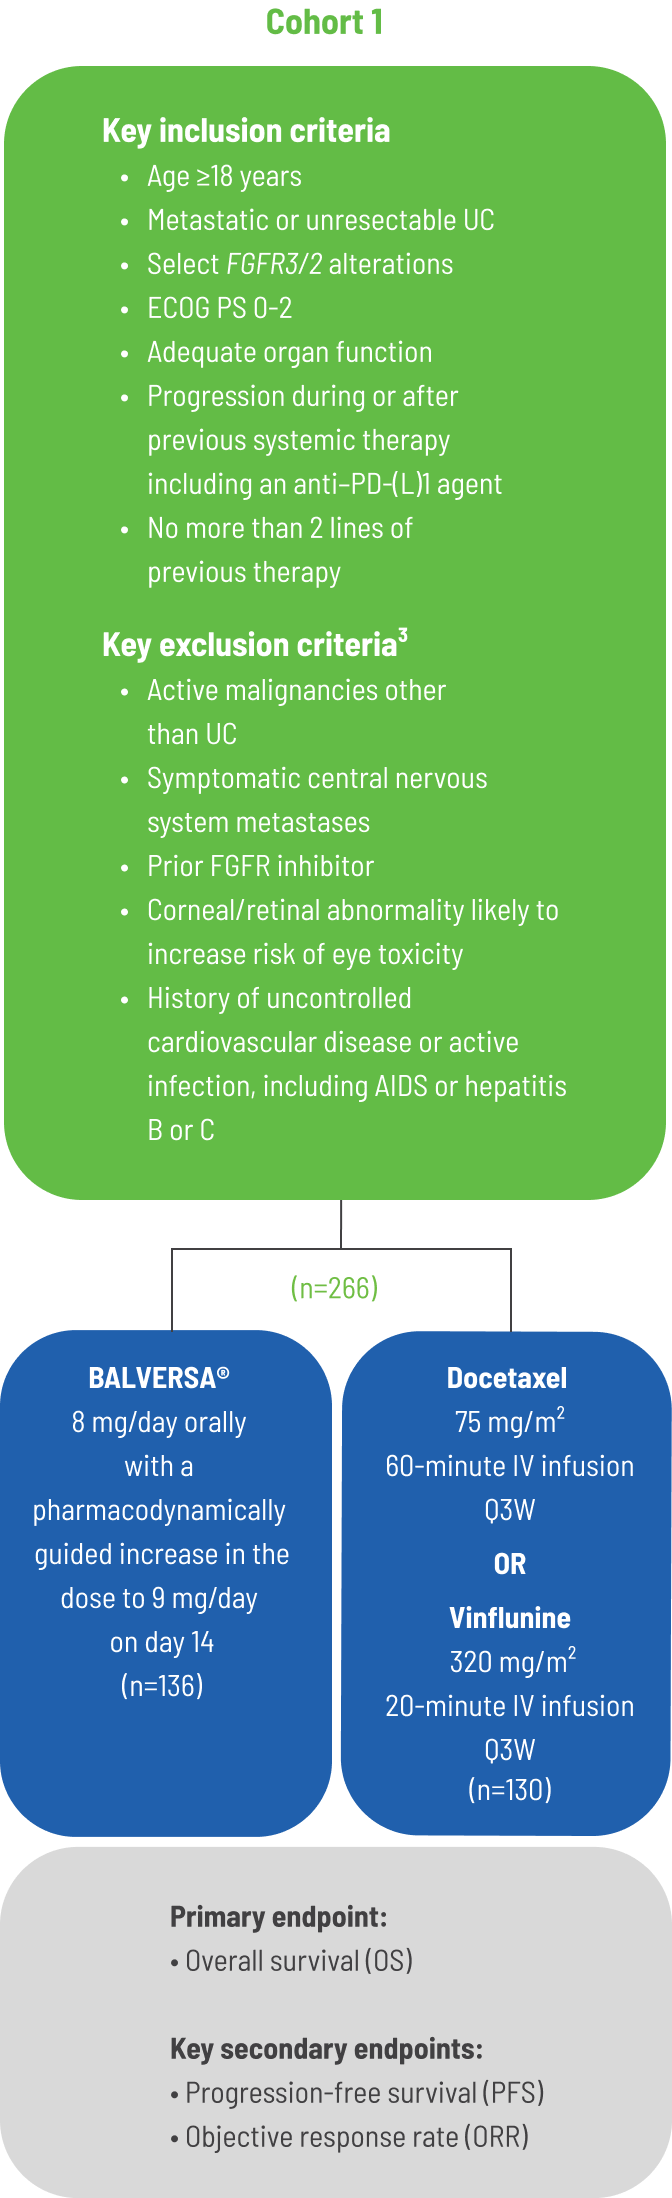 Flow chart showing the clinical study design for BALVERSA